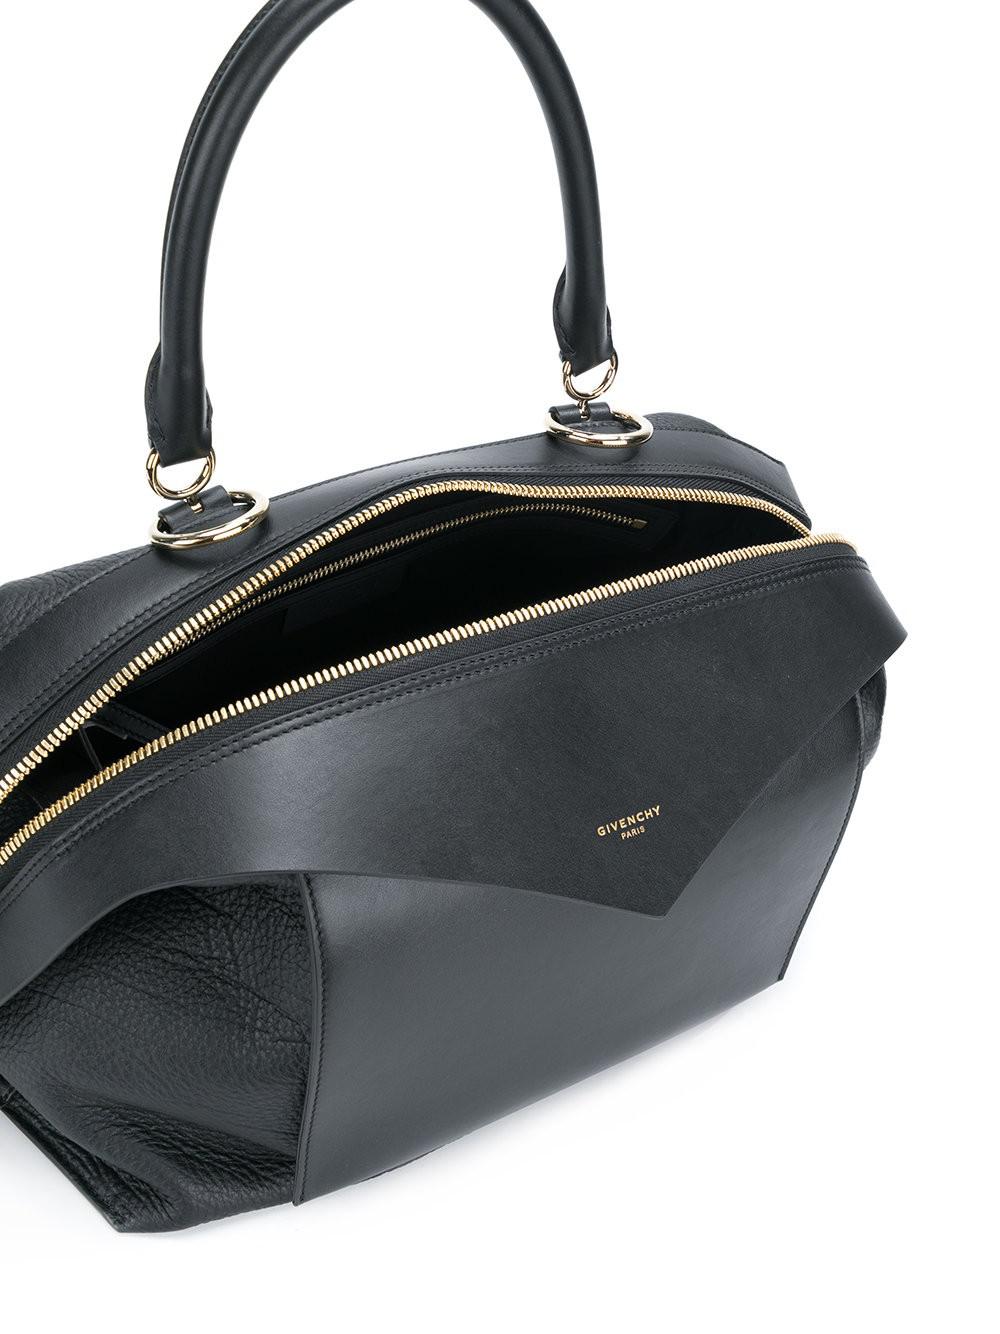 Givenchy Leather Sway Bag in Black | Lyst